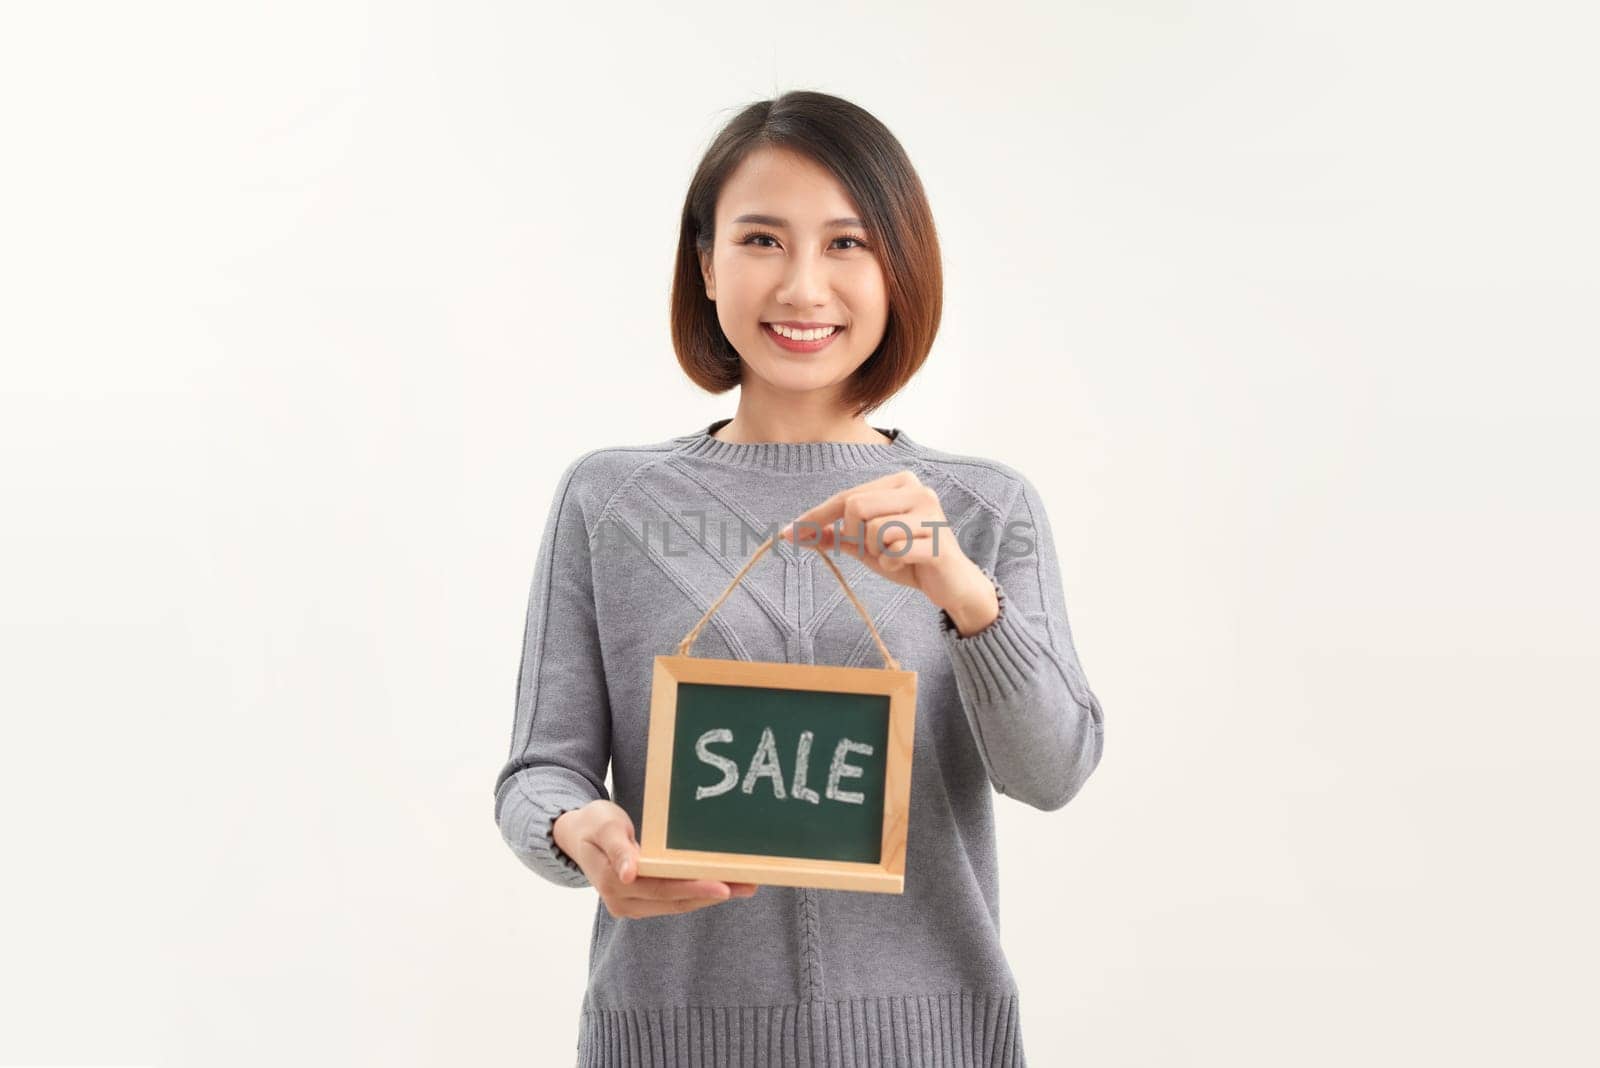 Young woman shop owner, wearing apron holding SALE word banner